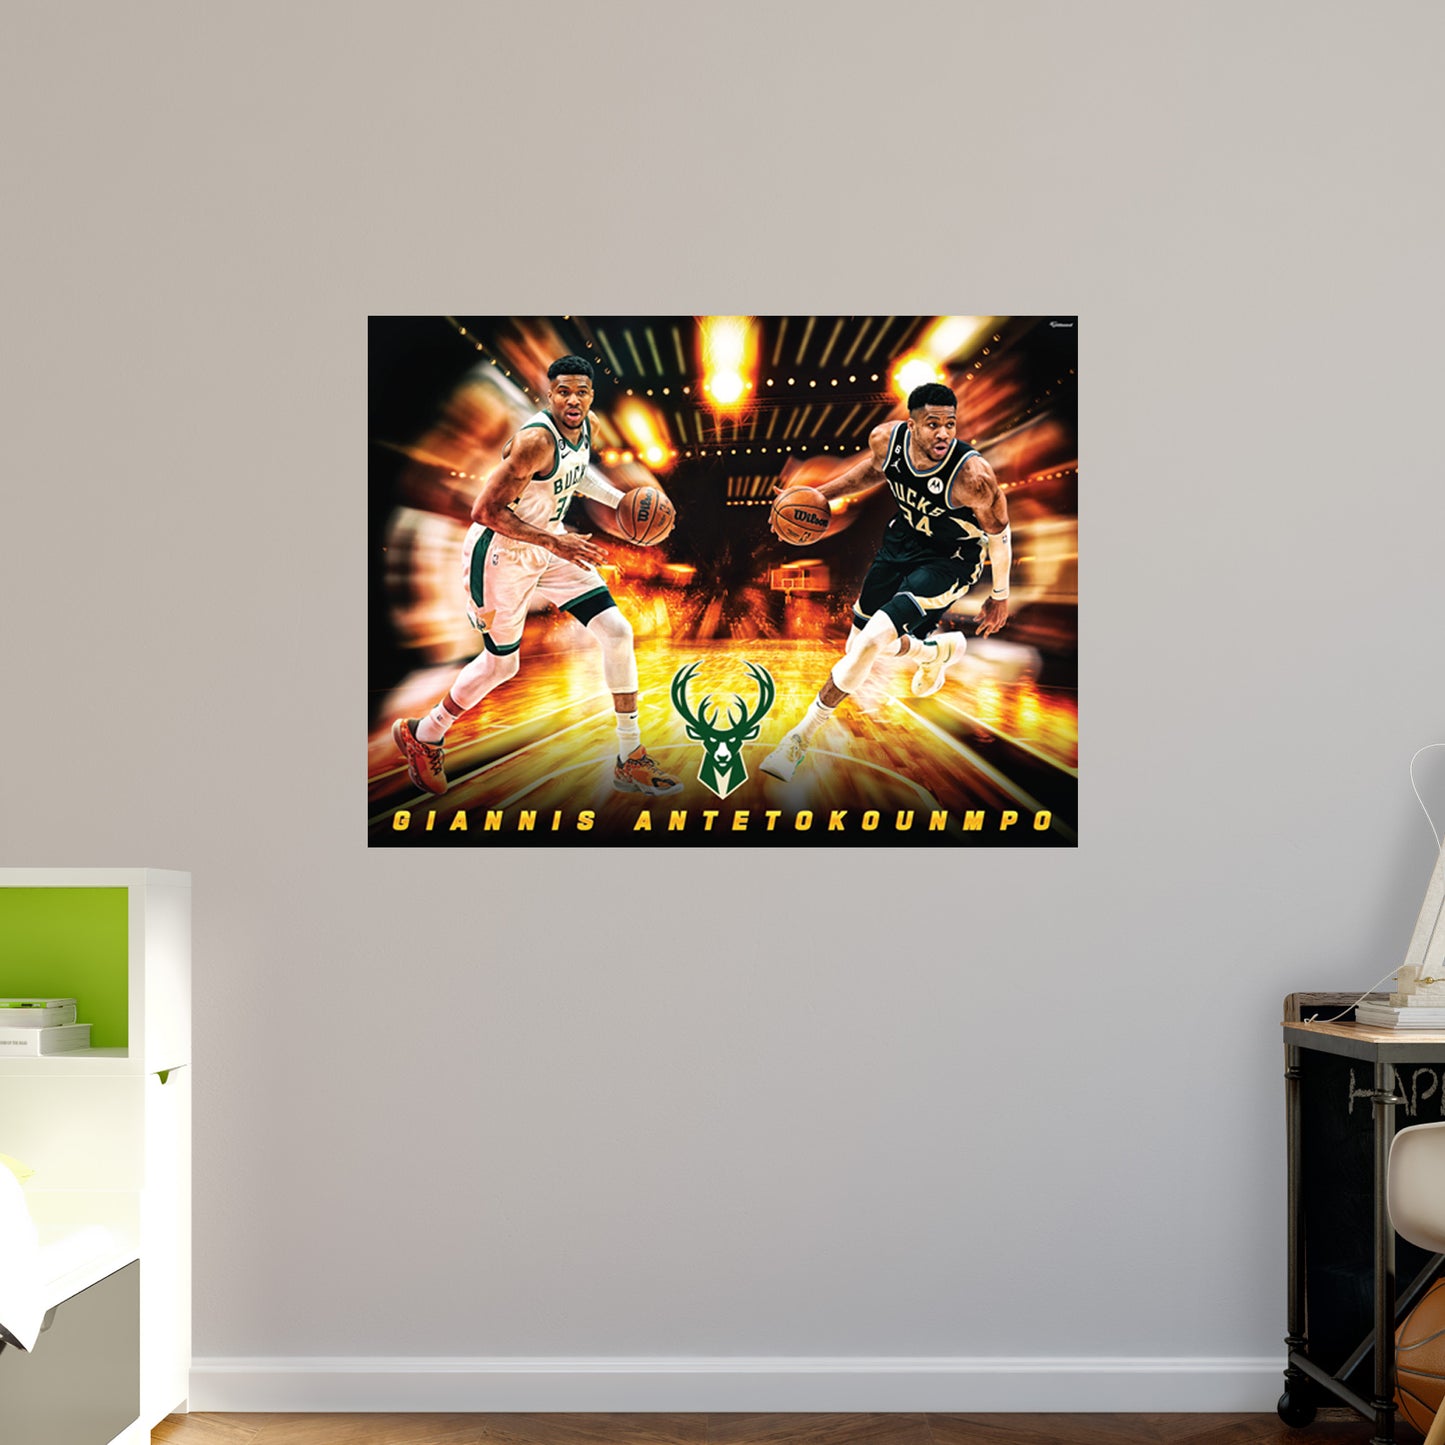 Milwaukee Bucks: Giannis Antetokounmpo Icon Poster - Officially Licensed NBA Removable Adhesive Decal